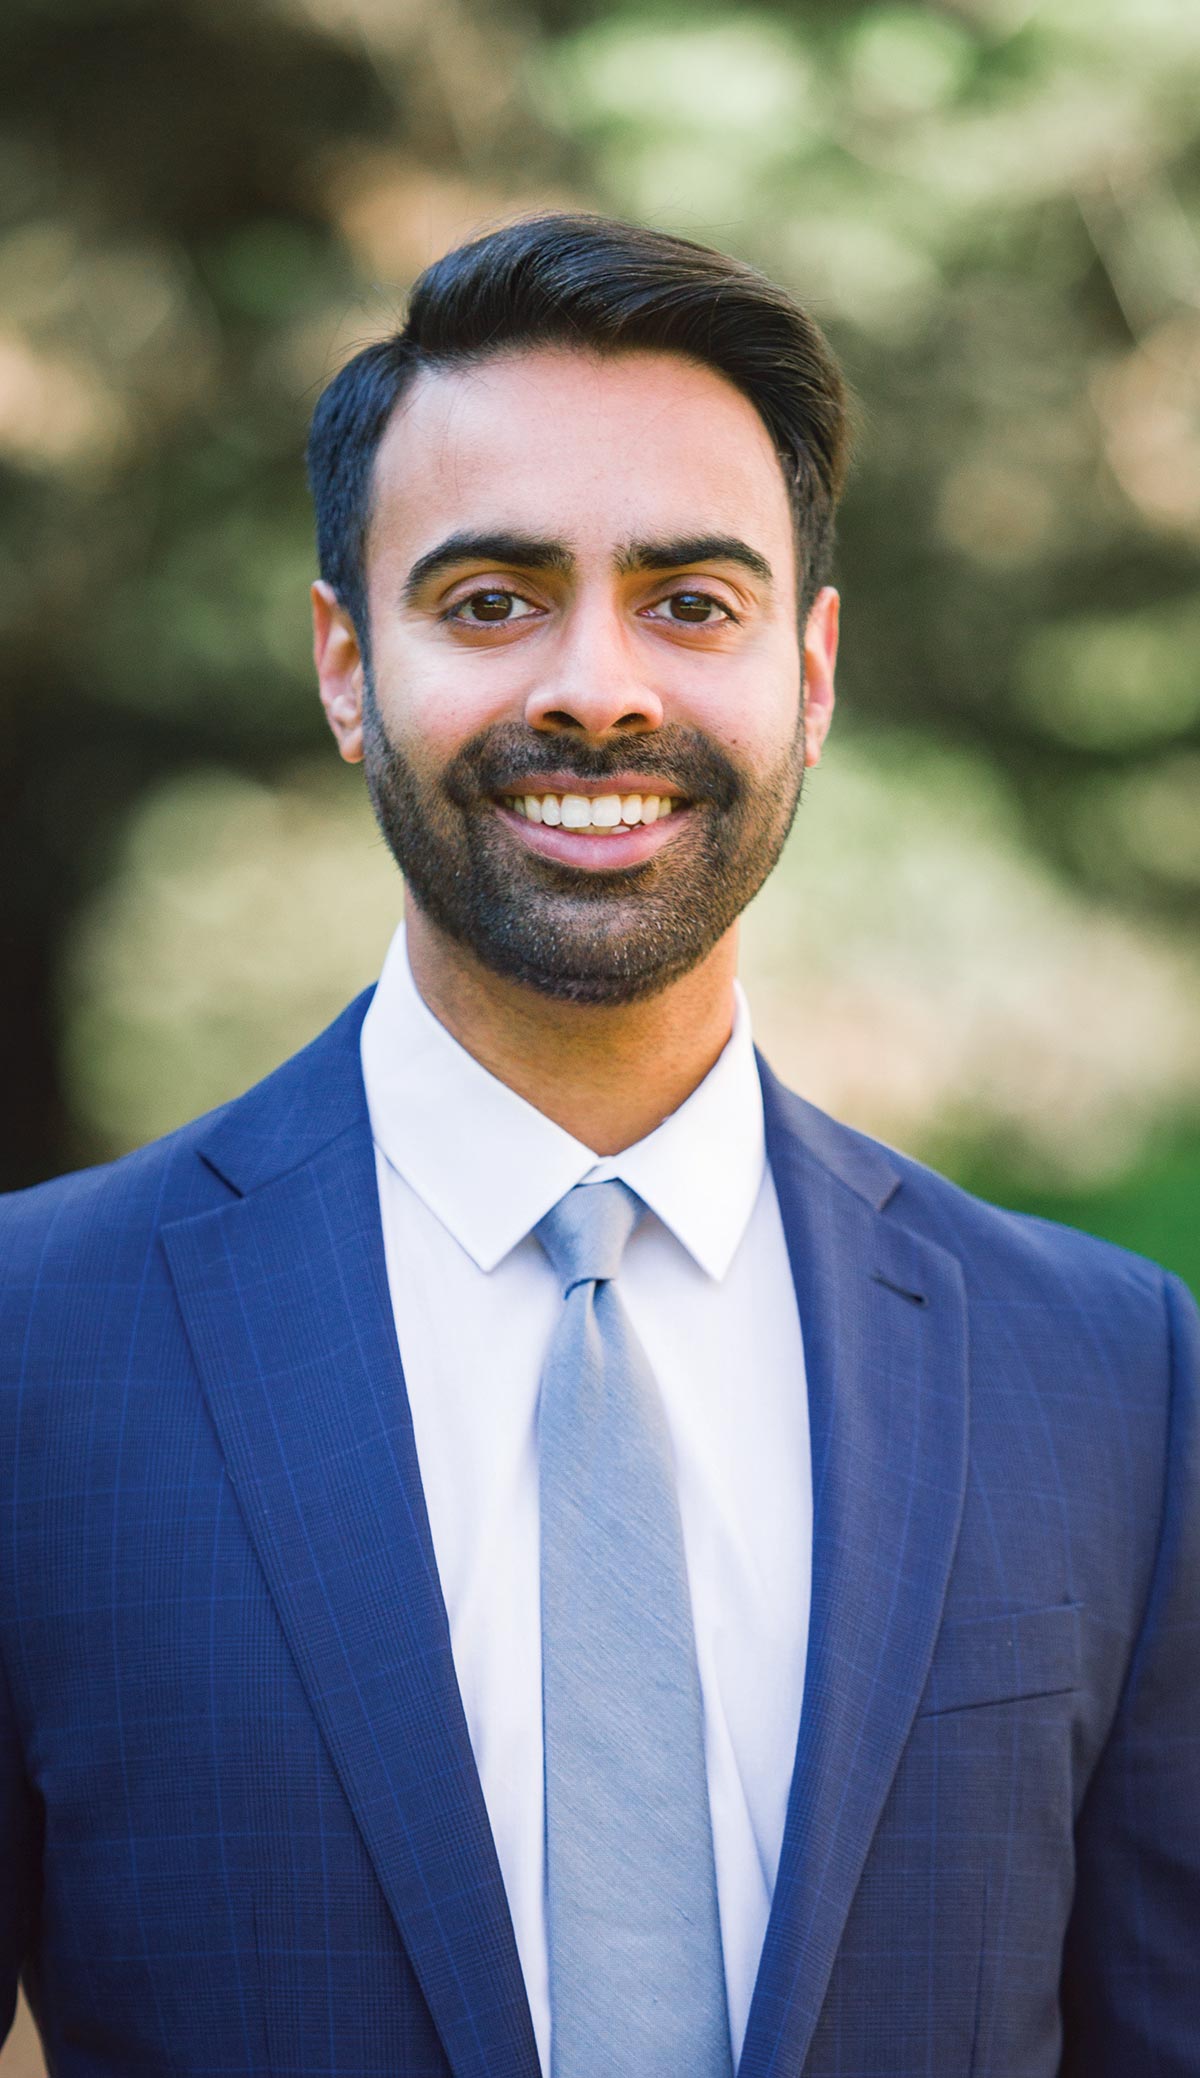 A portrait photograph of Nikesh Patel smiling as he poses for a picture in his business attire outside